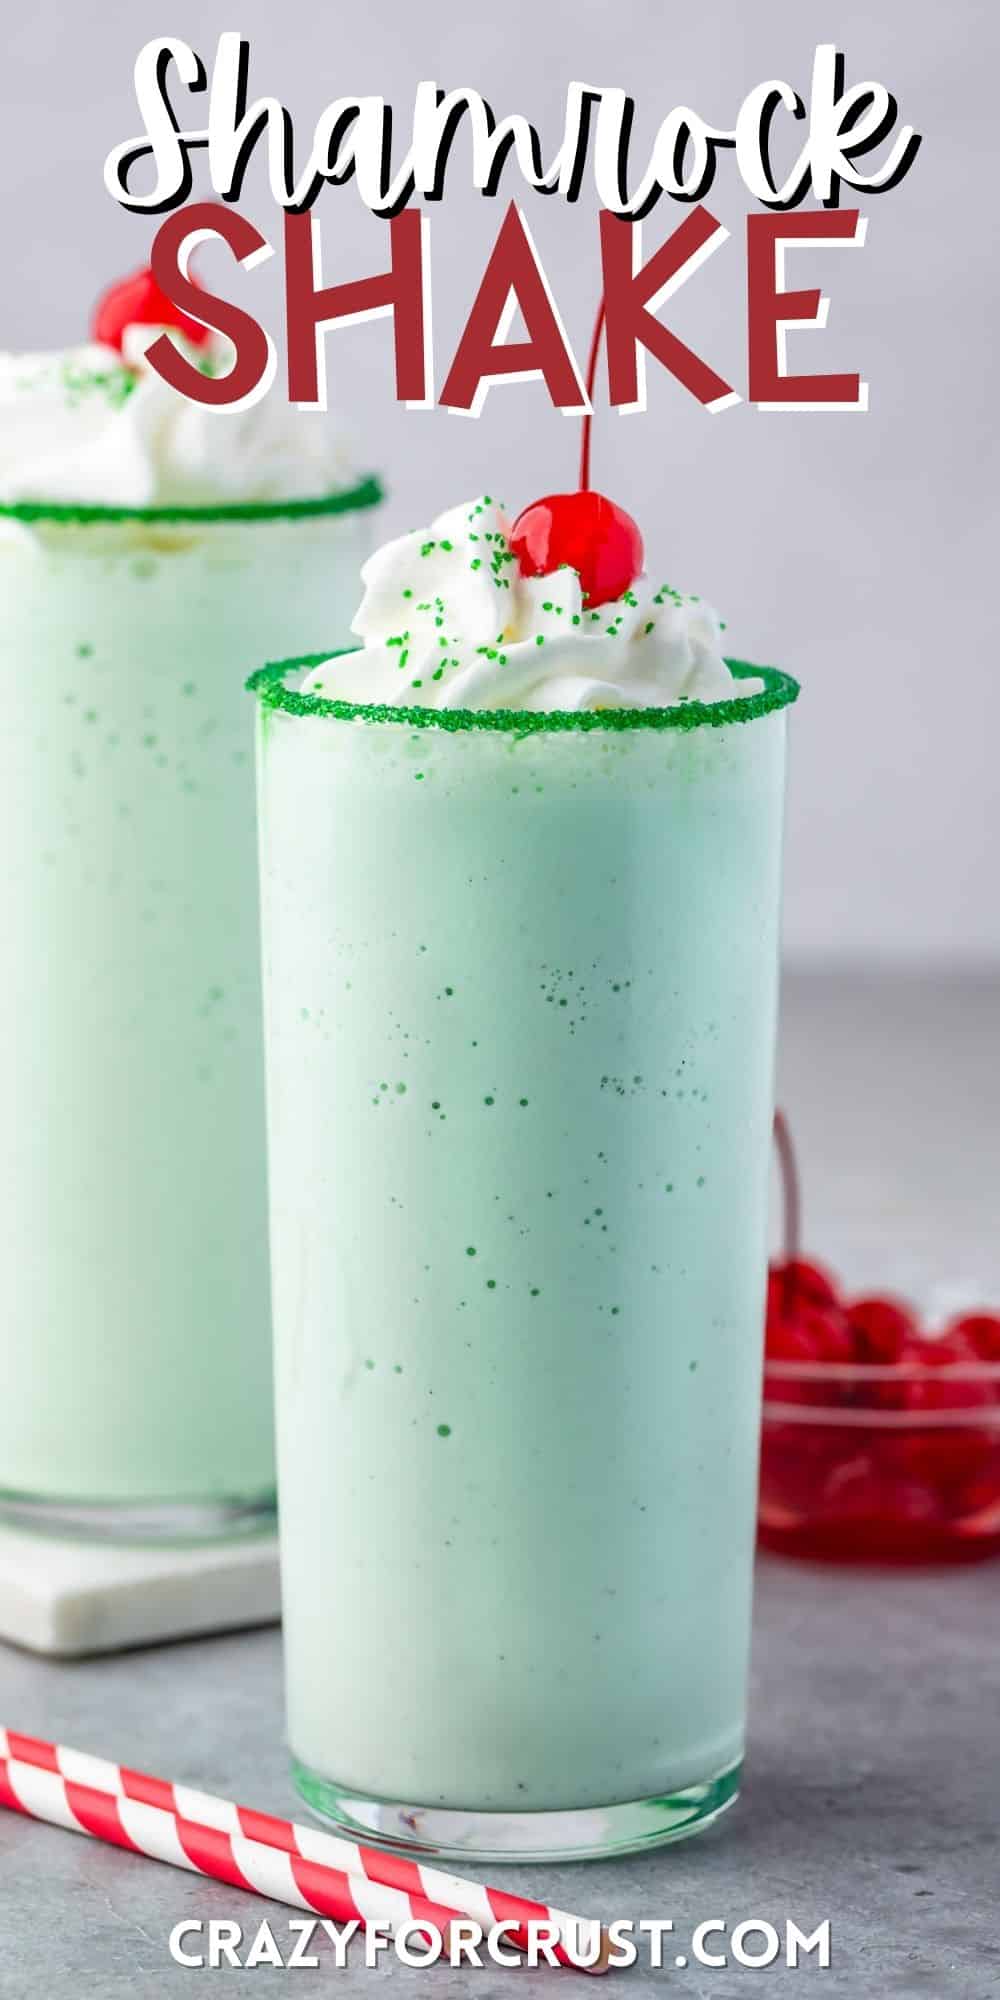 green shake in a clear glass topped with whipped cream and a cherry with words on the image.